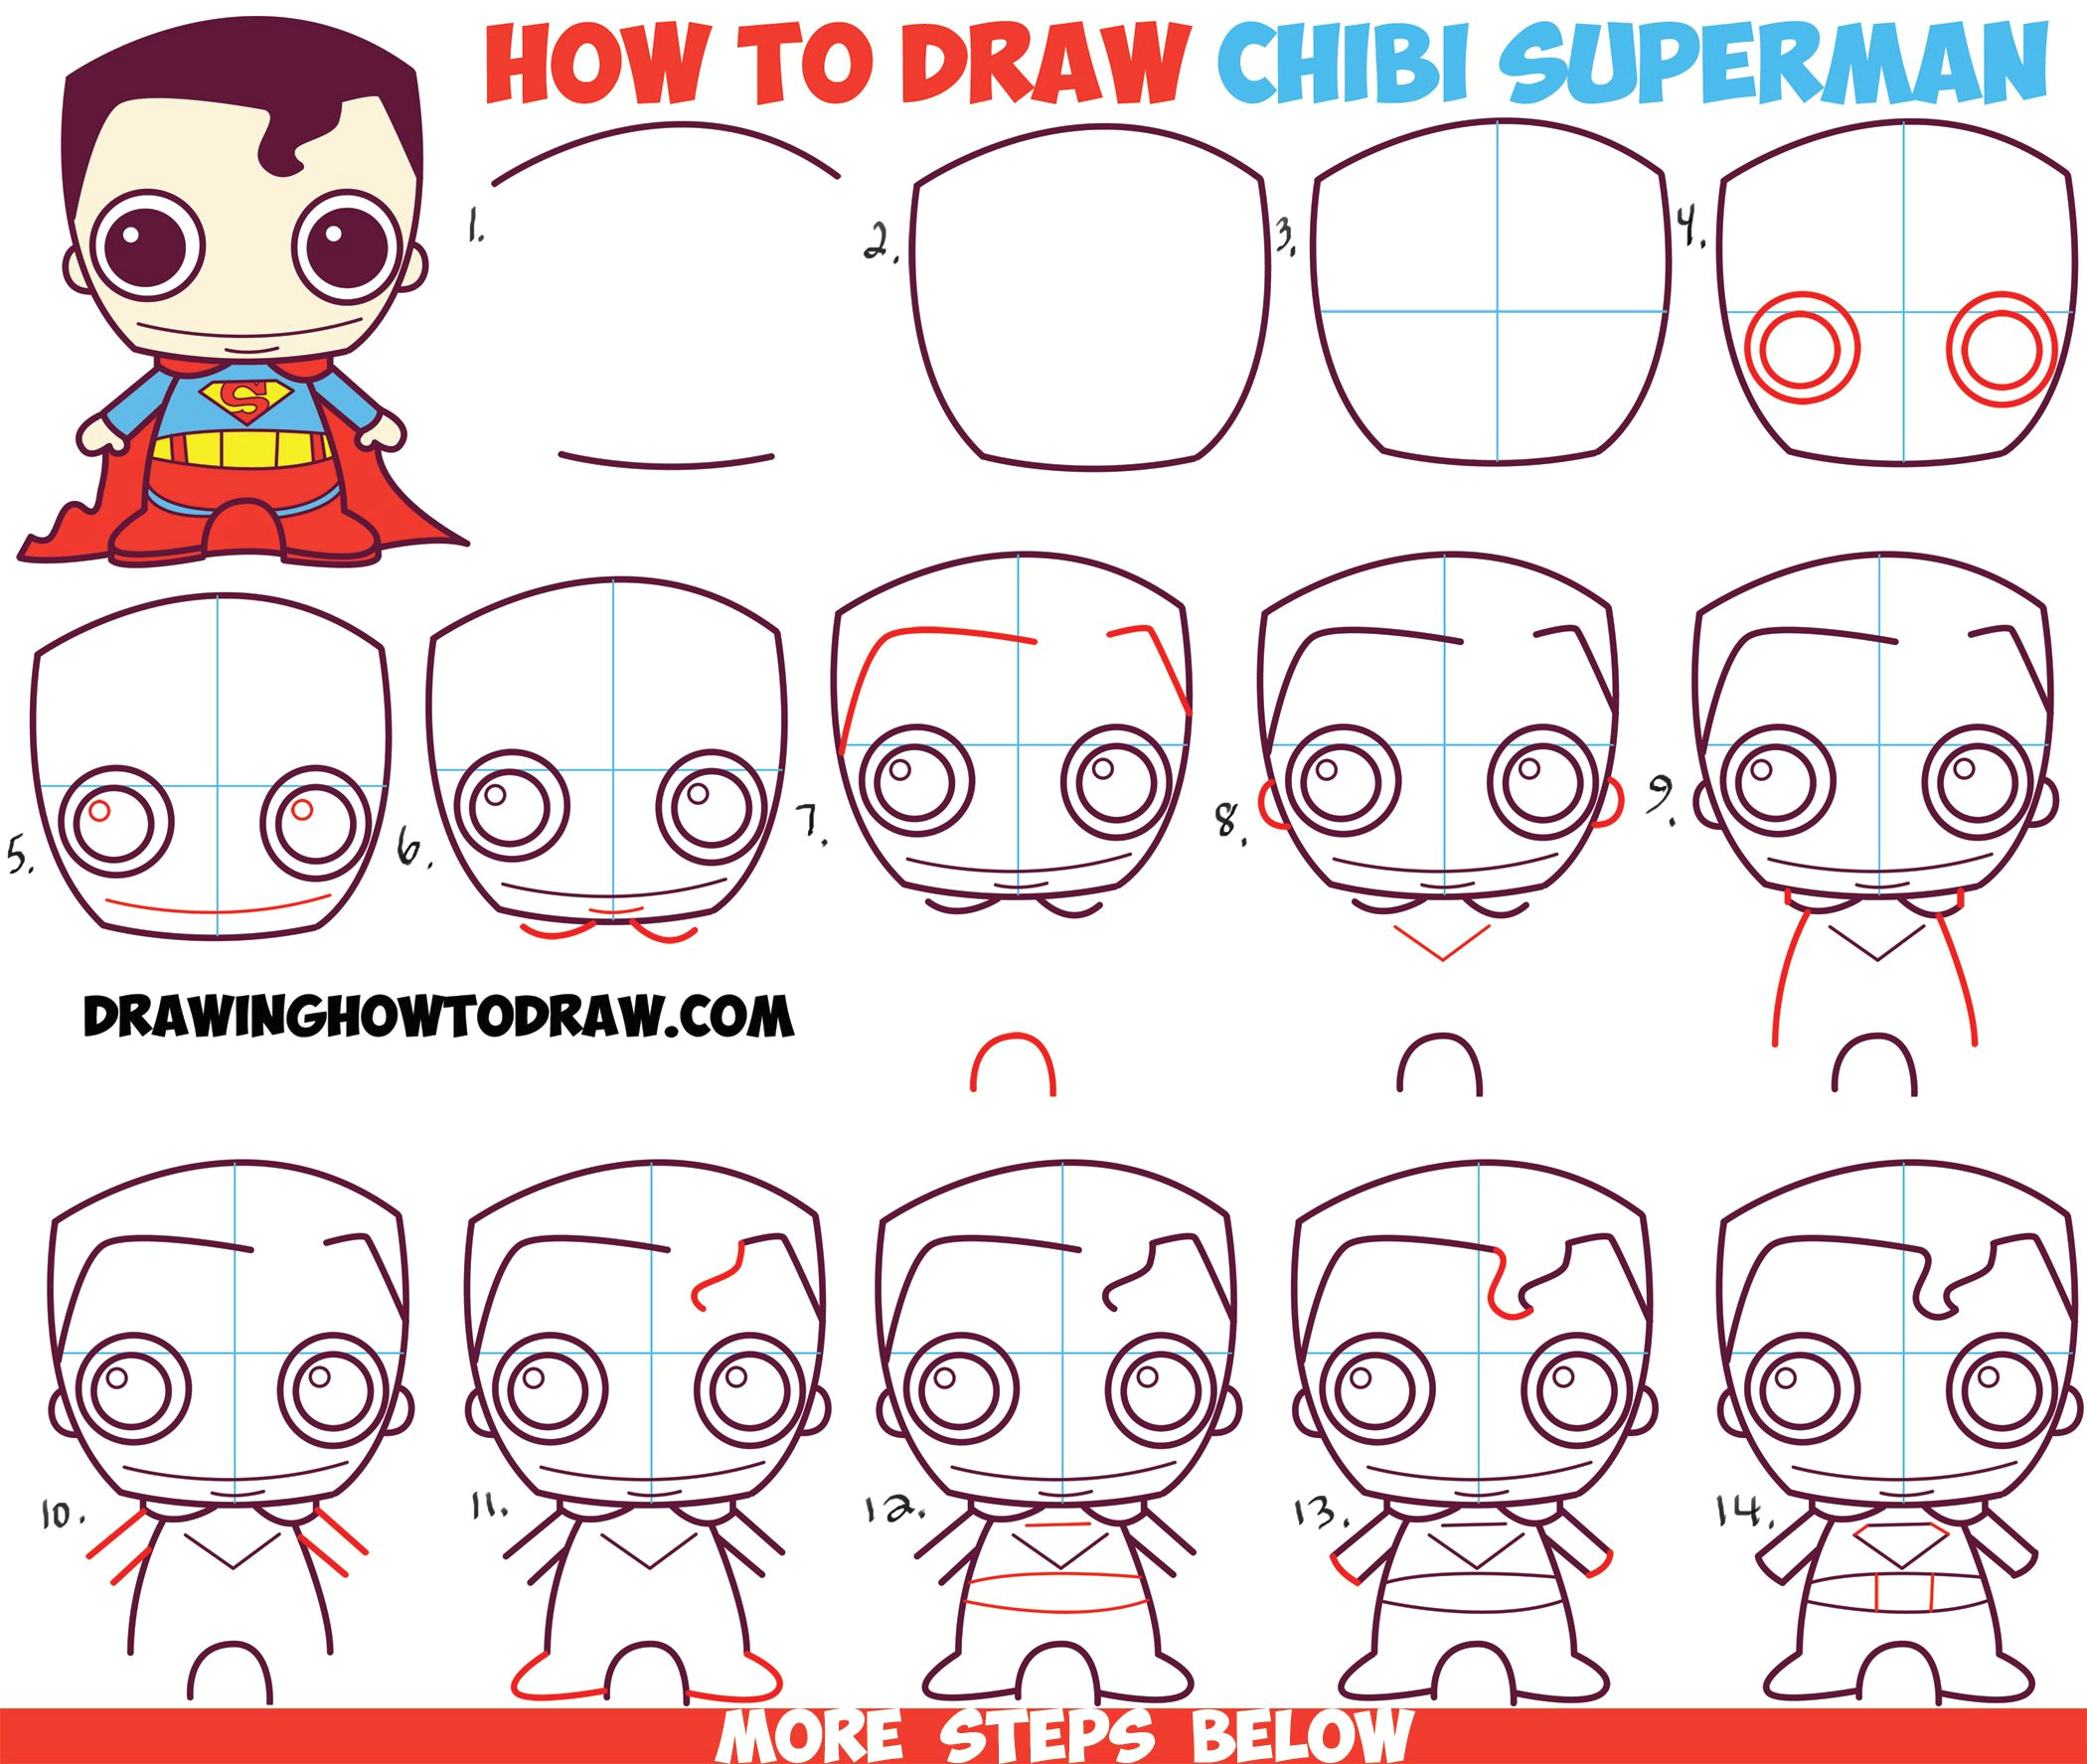 Cartoon Drawing Tutorial for Beginners How to Draw Cute Chibi Superman From Dc Comics In Easy Step by Step